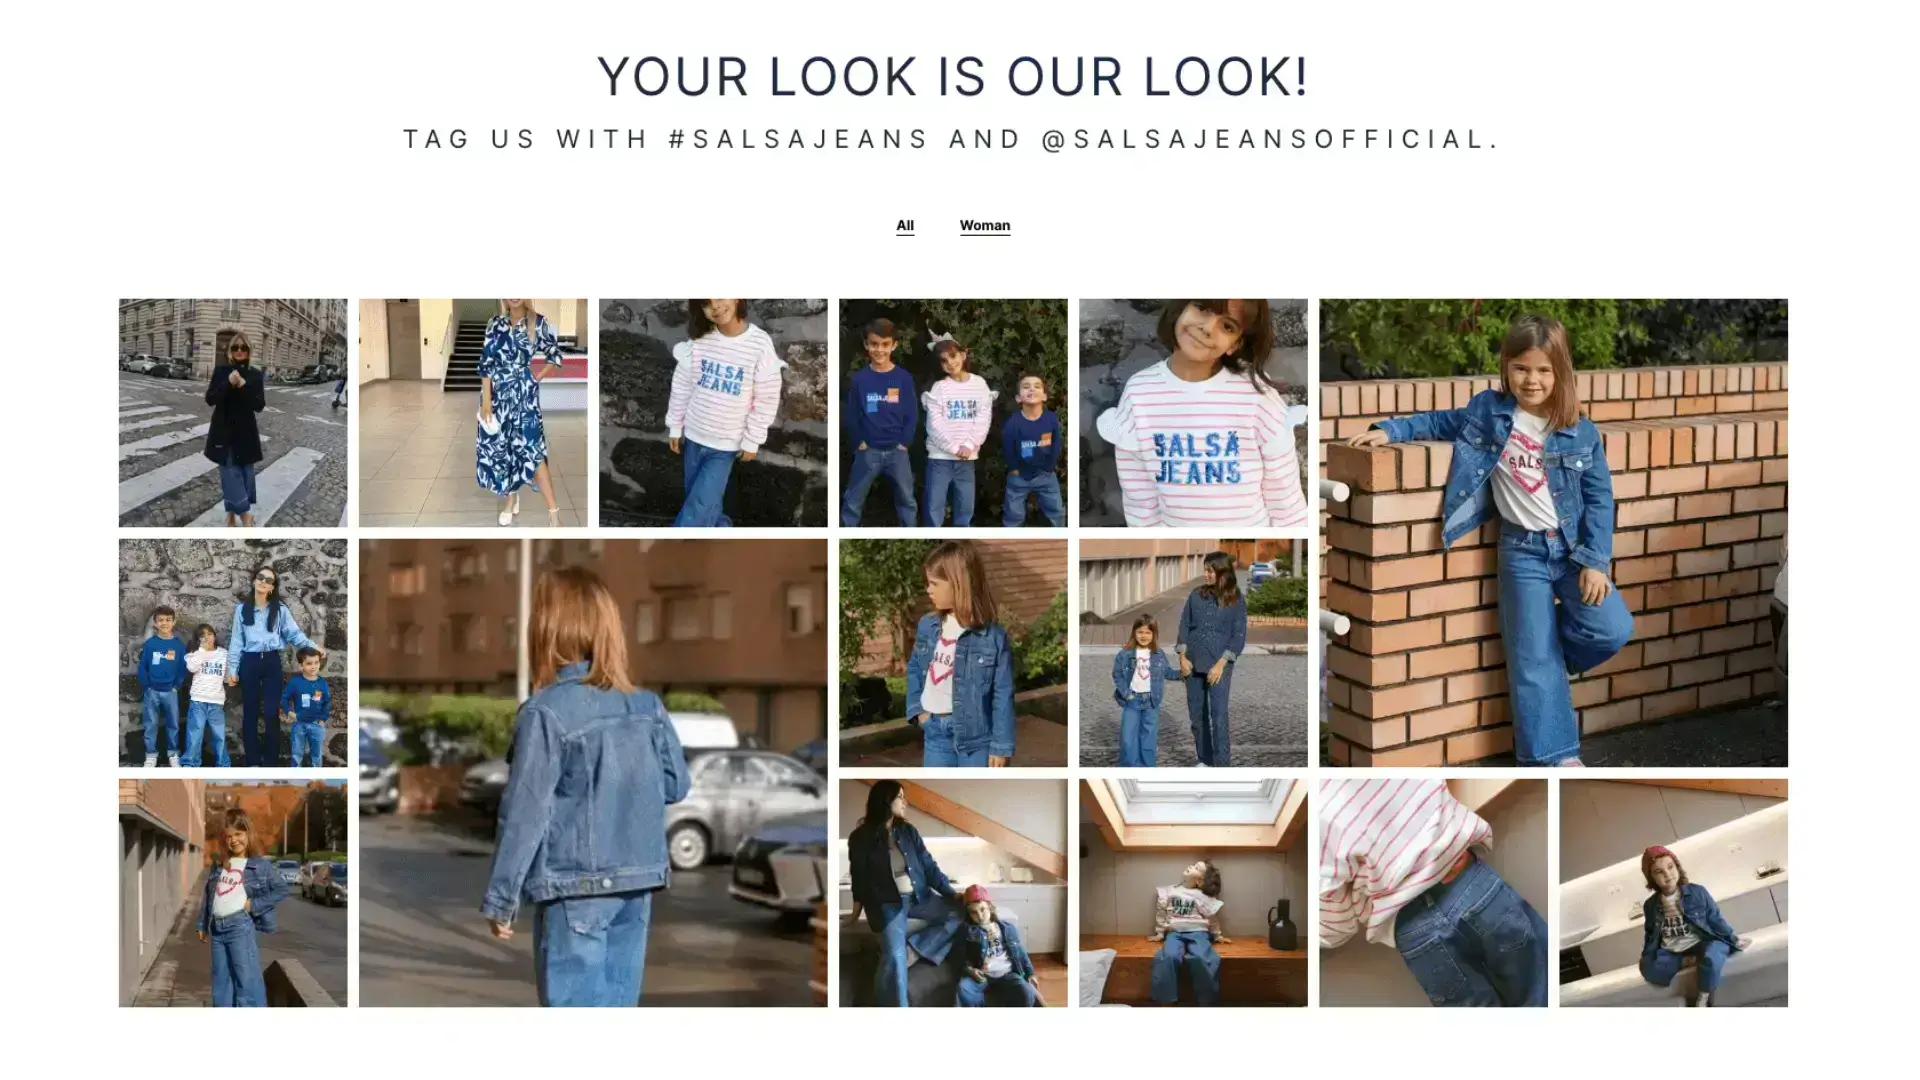 Salsa Jeans partners with Europe’s leading UGC solution, Flowbox